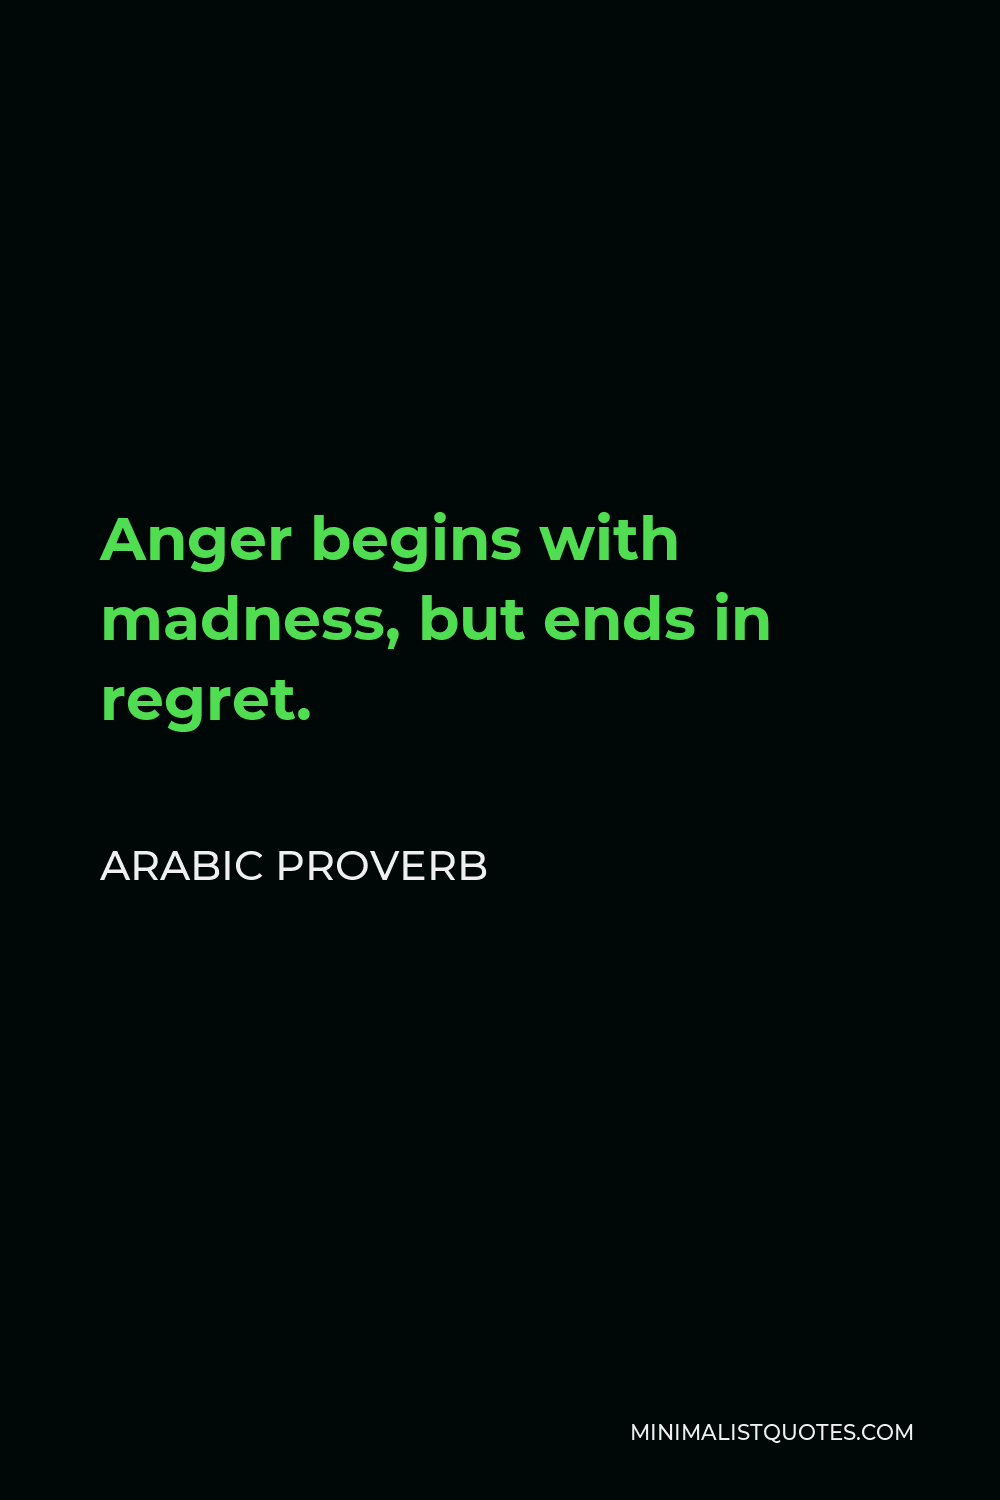 Arabic Proverb Quote - Anger begins with madness, but ends in regret.